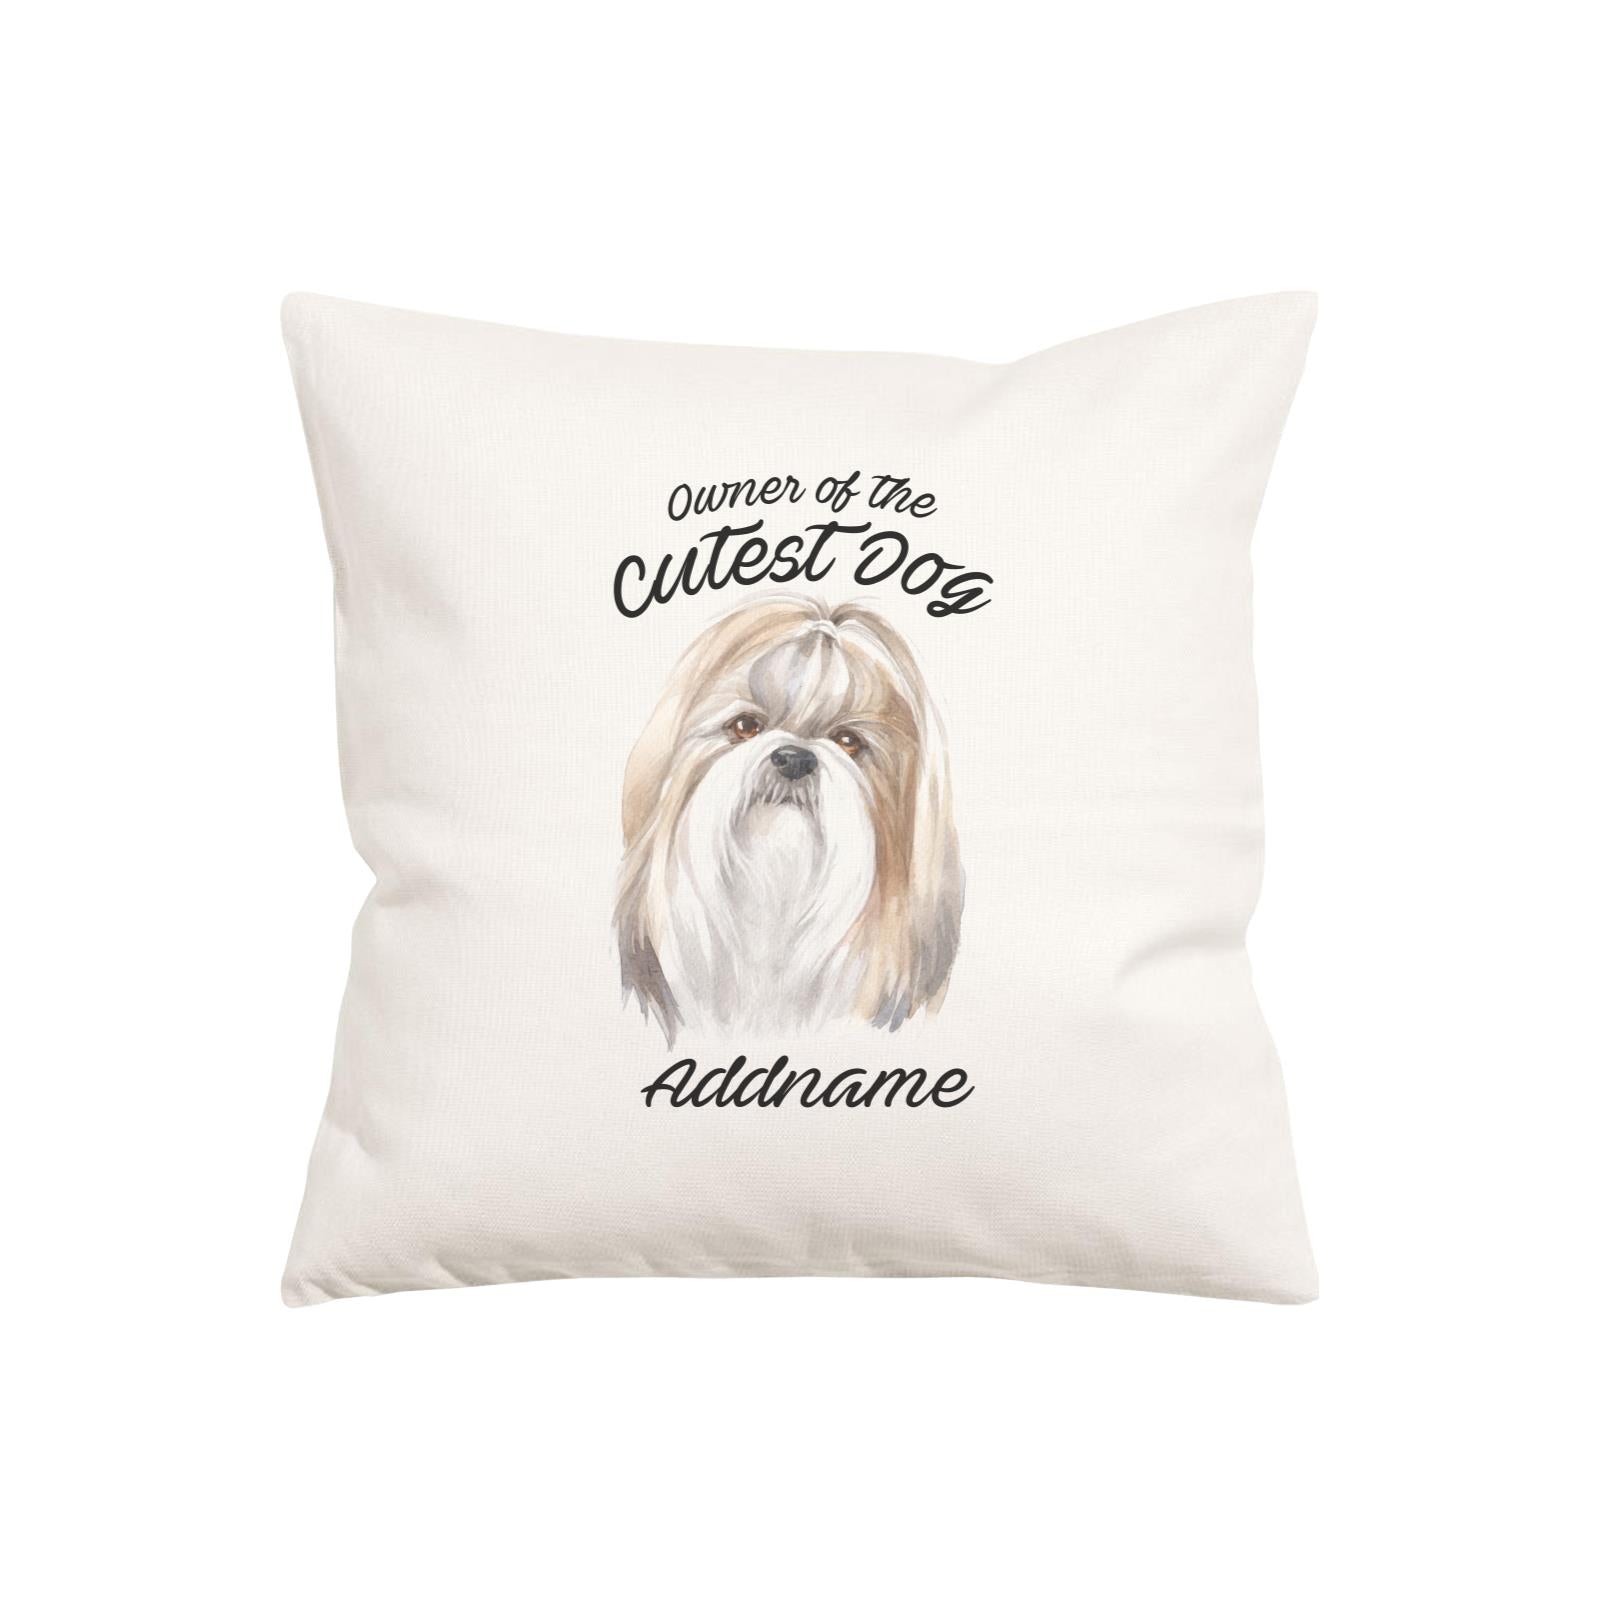 Watercolor Dog Owner Of The Cutest Dog Shih Tzu Addname Pillow Cushion